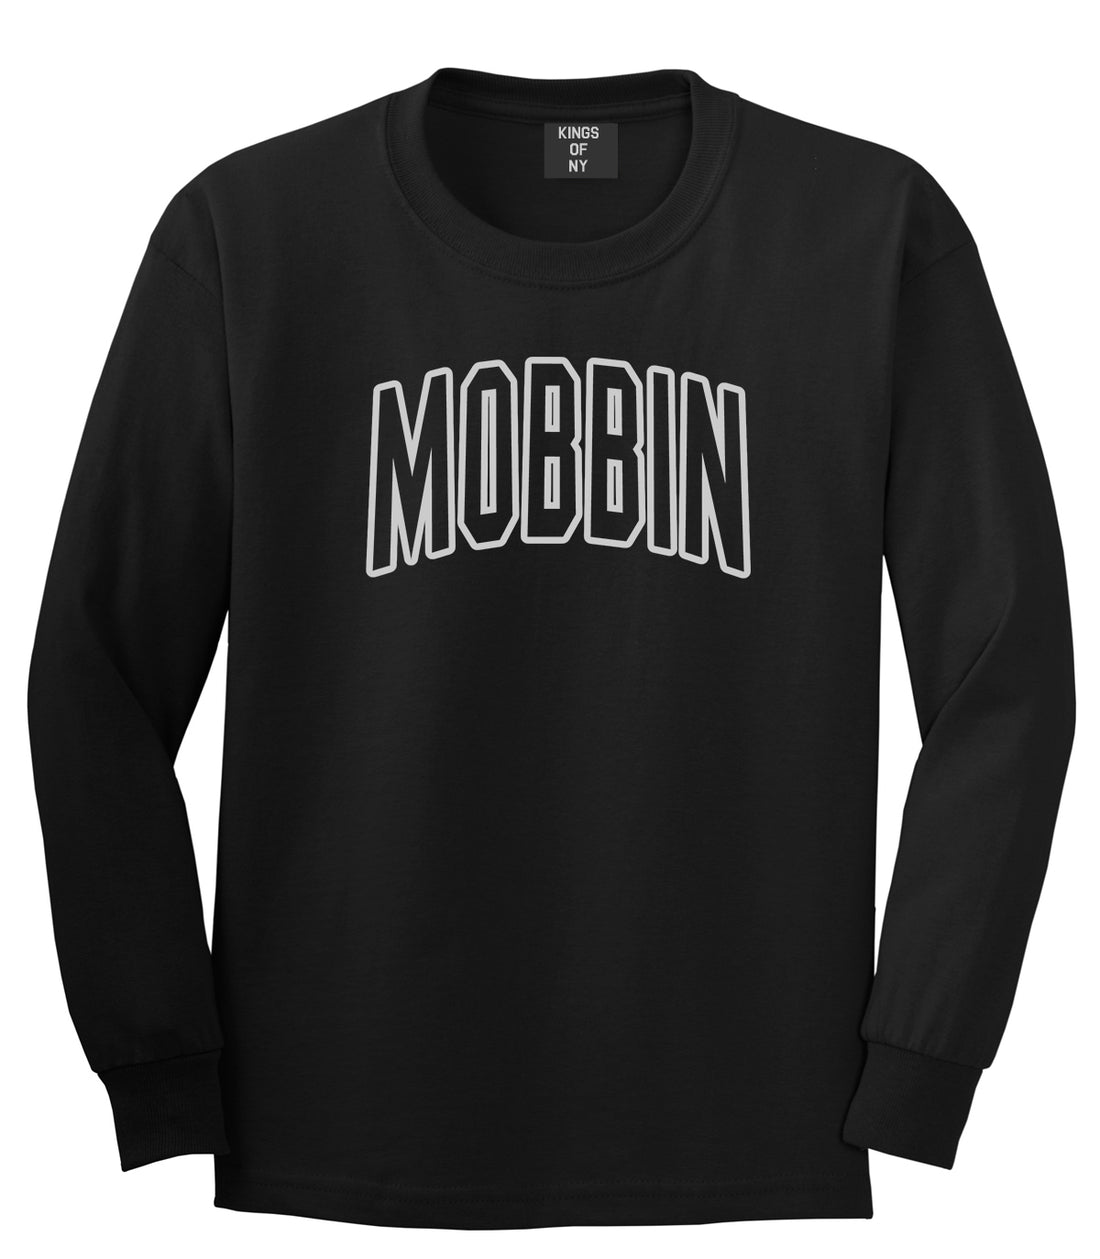 Mobbin Outline Squad Mens Long Sleeve T-Shirt Black by Kings Of NY